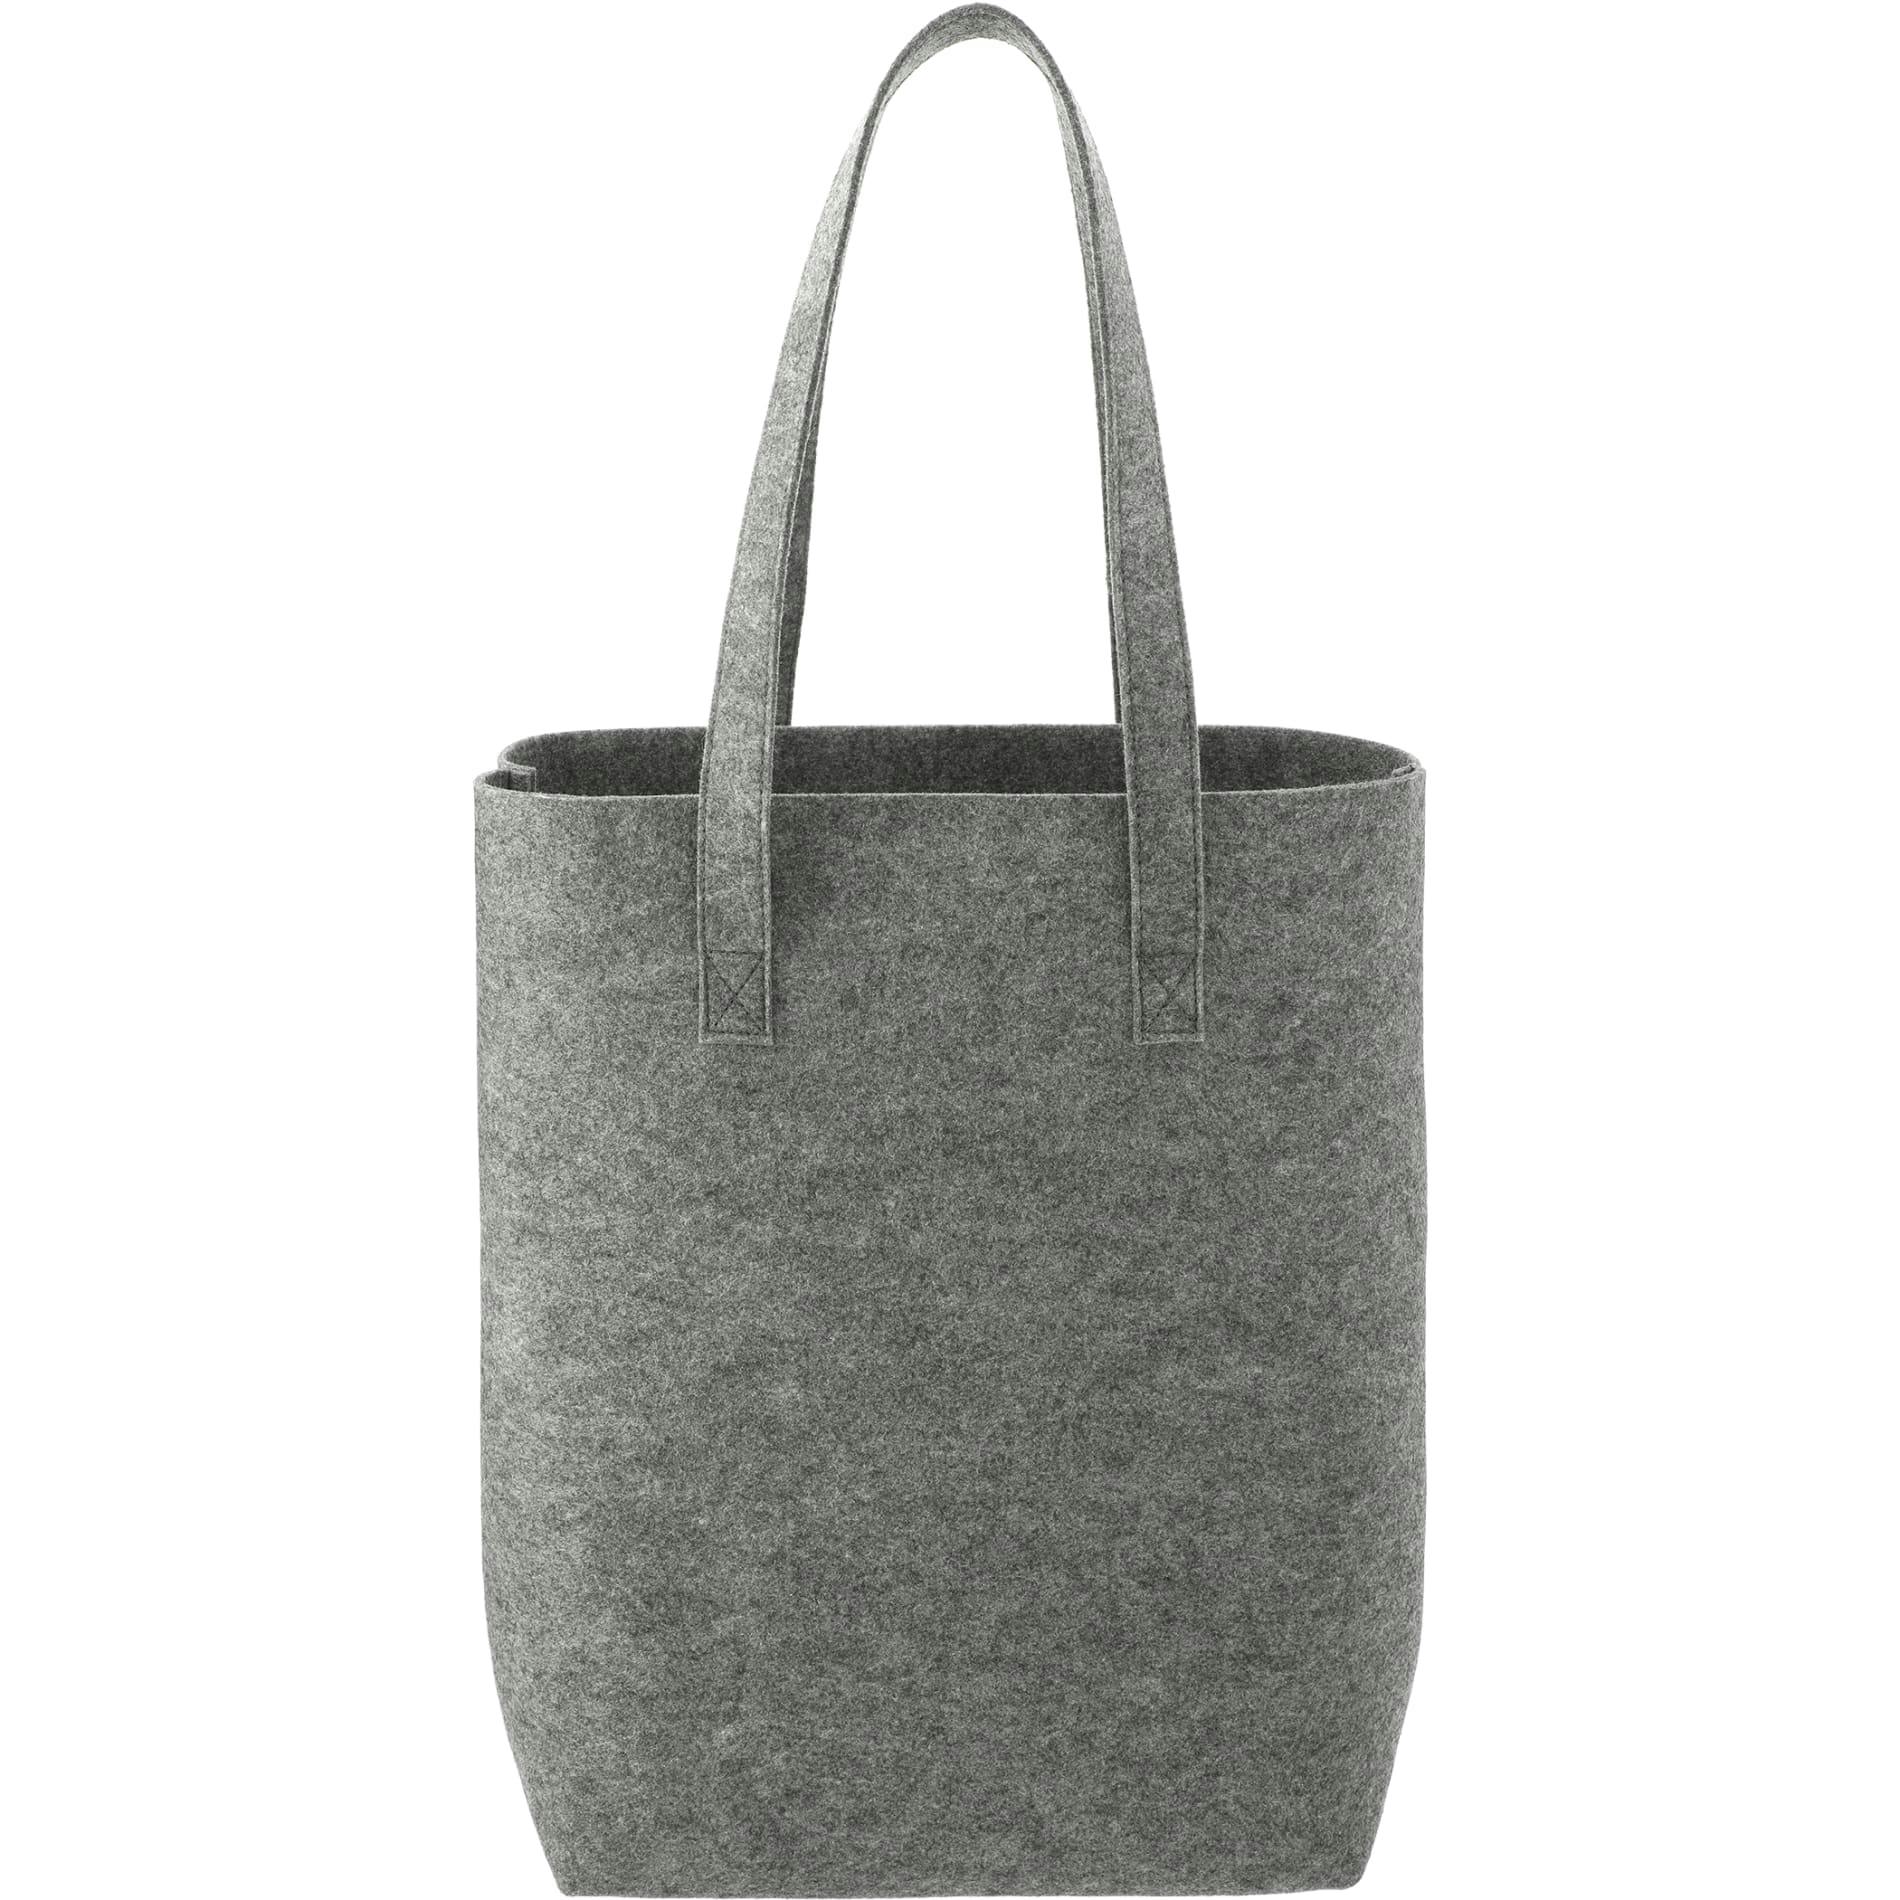 Recycled Felt Shopper Tote - additional Image 2